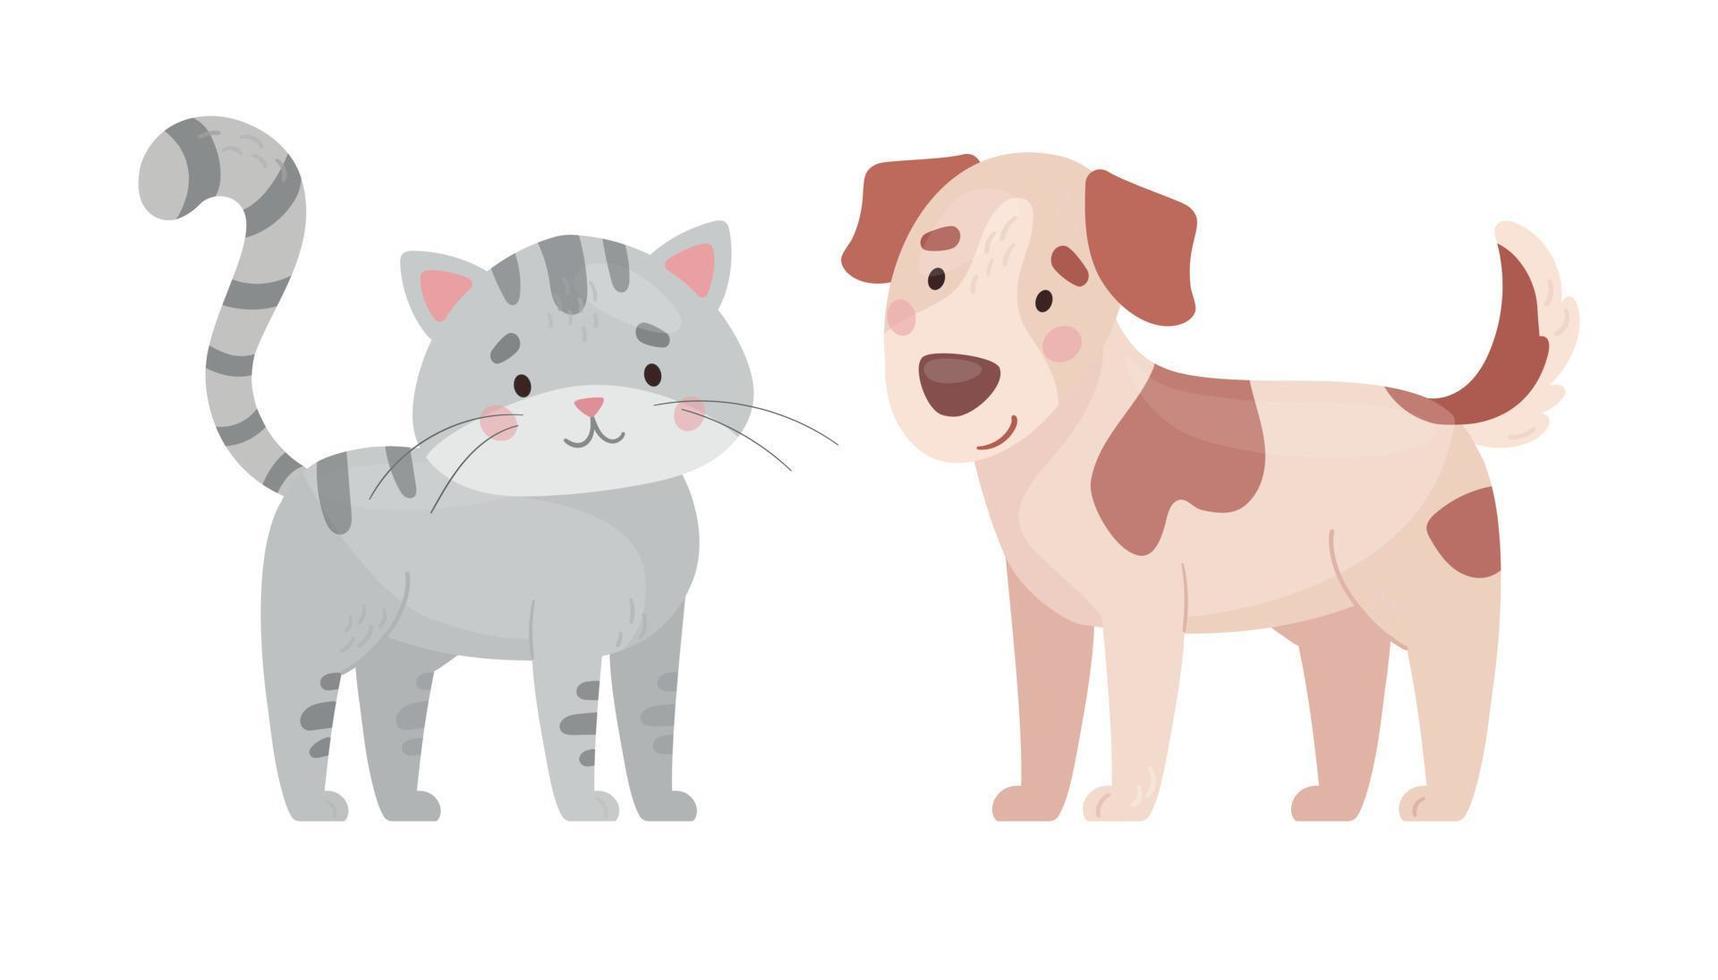 Cute cat and dog. Vector illustration in flat style, isolated on white background. Gray striped kitten and spotted puppy. cartoon kids characters.